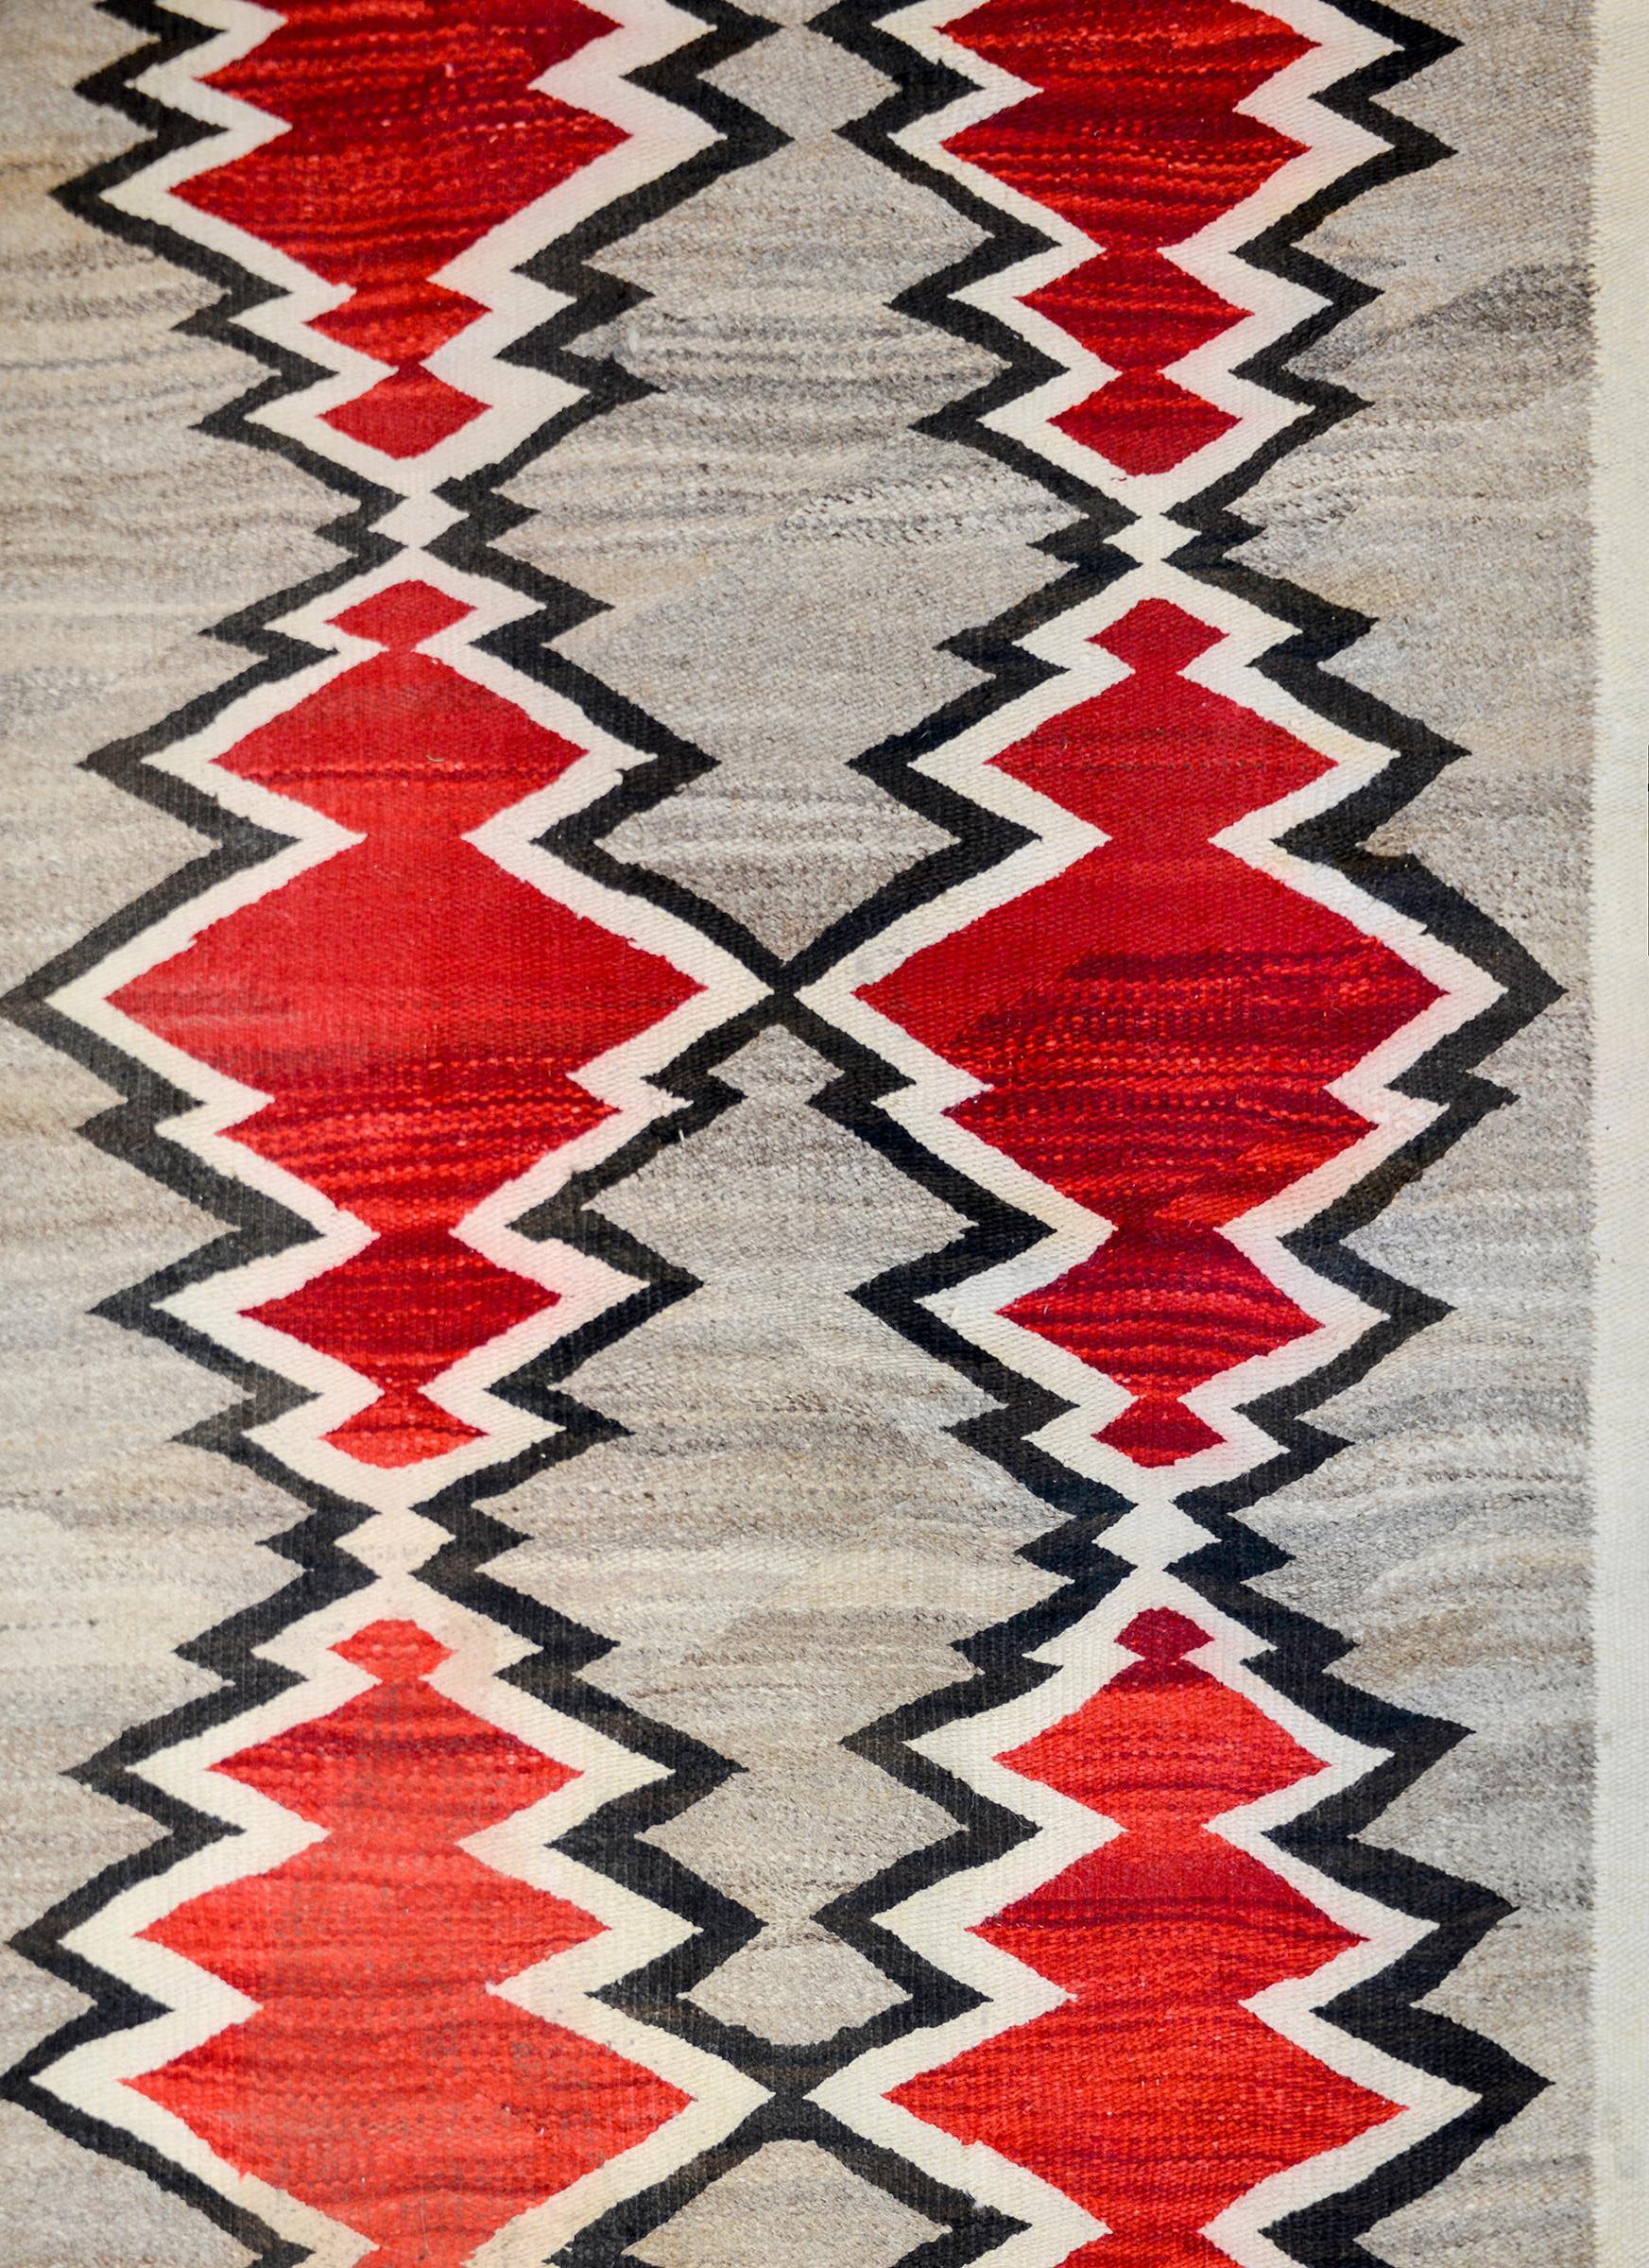 A gorgeous early 20th century Navajo rug with a repeated large scale abrash crimson diamond pattern on an abrash grey ground surrounded by a simple black and white striped border.